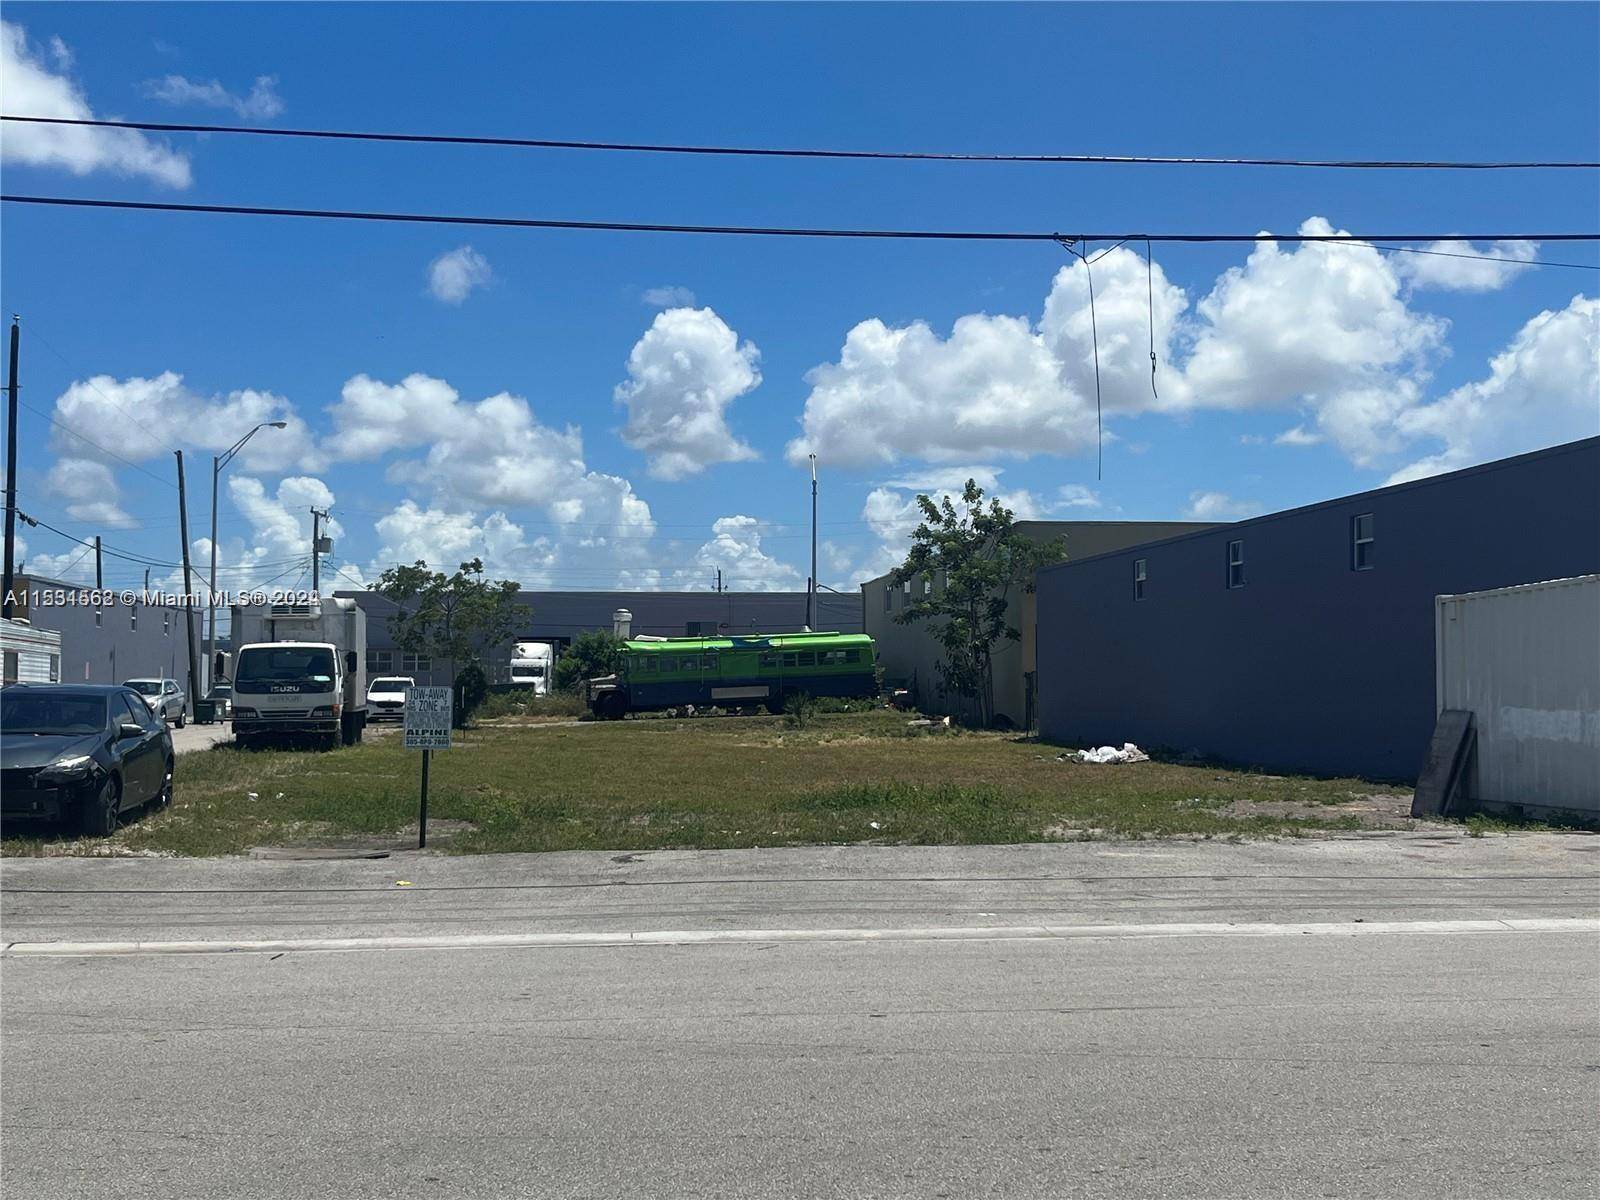 9, 240 sq ft of industrial, light manufacturing, corner lot.